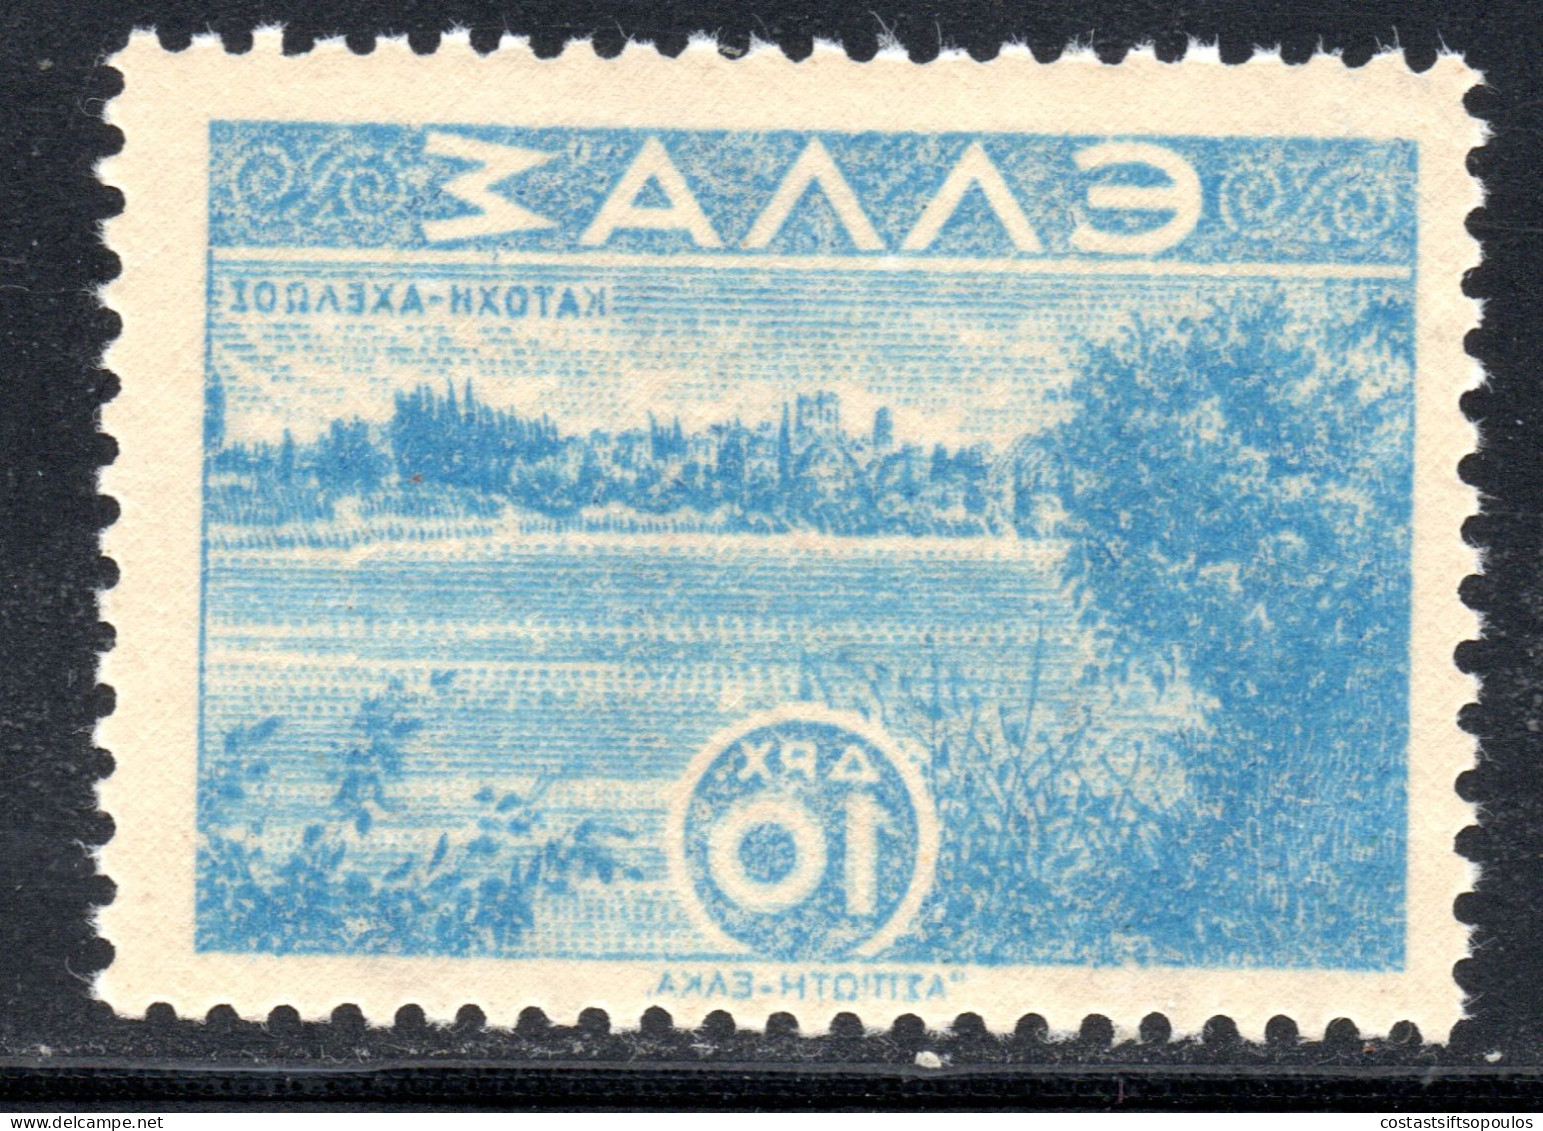 3745. GREECE 1946 100 DR./10 DR. ACHELOOS VERY FINE AND SCARCE MIRROR PRINT, MNH - Errors, Freaks & Oddities (EFO)